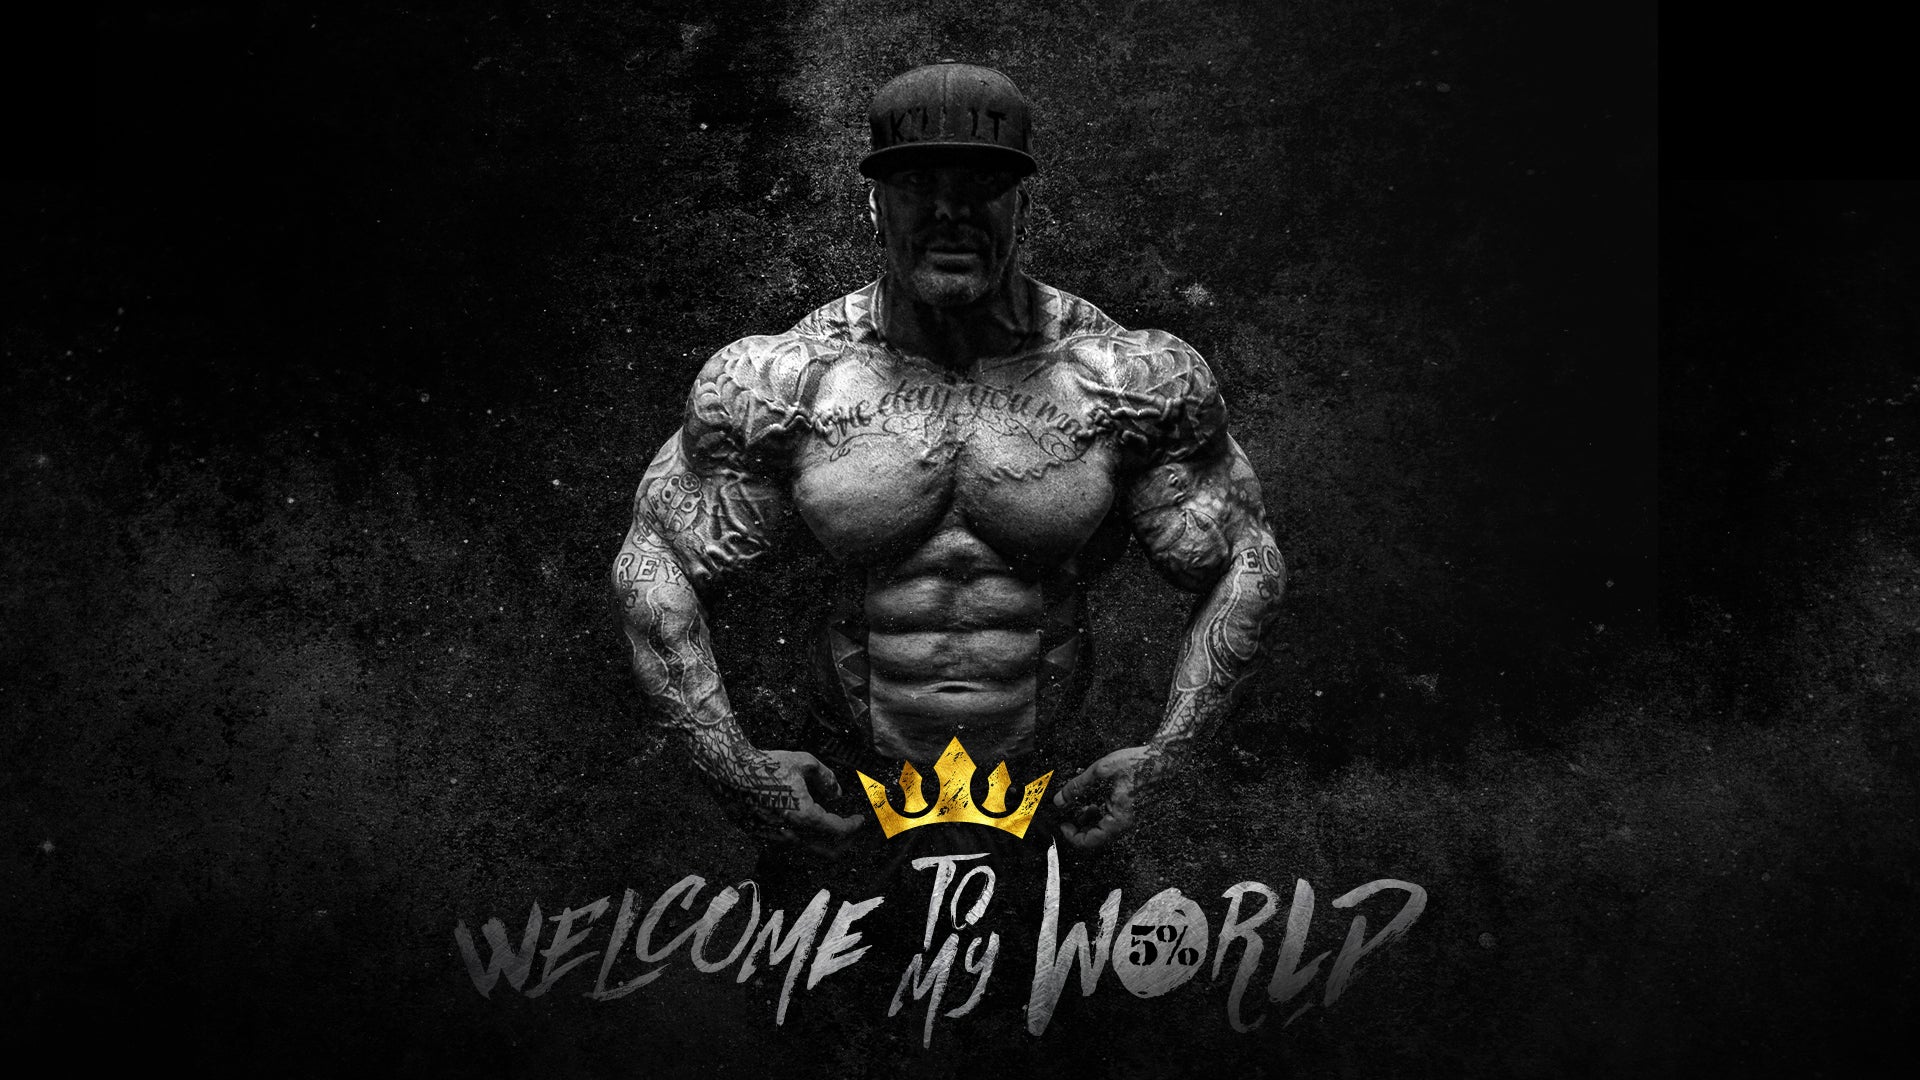 Desktop tablet mobile phone wallpapers and video call backgrounds of rich piana and the mentality â nutrition